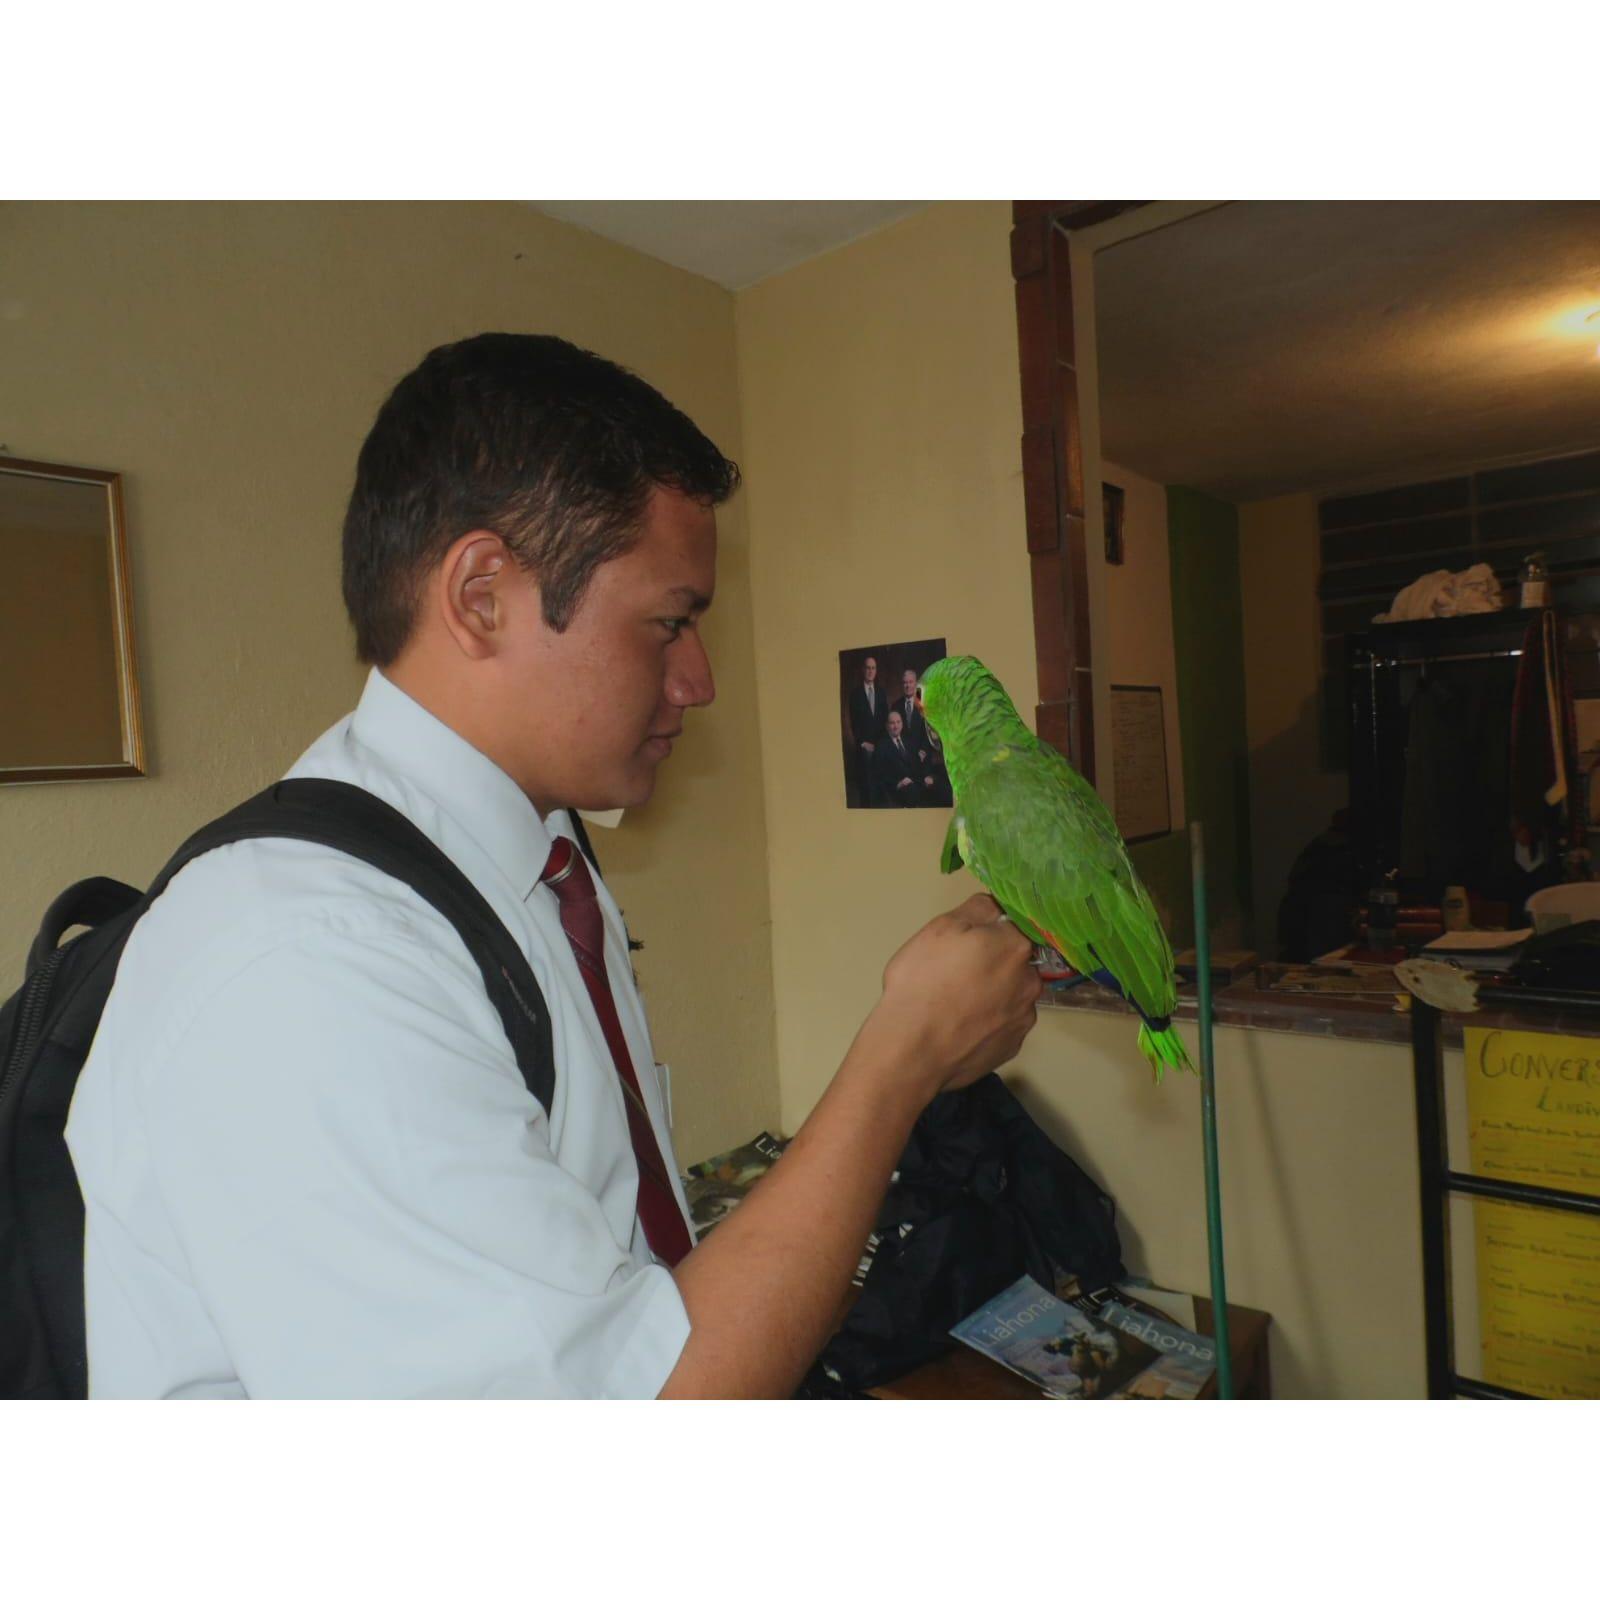 Daniel when he was a missionary in Guatemala with the parrot he rescued :)